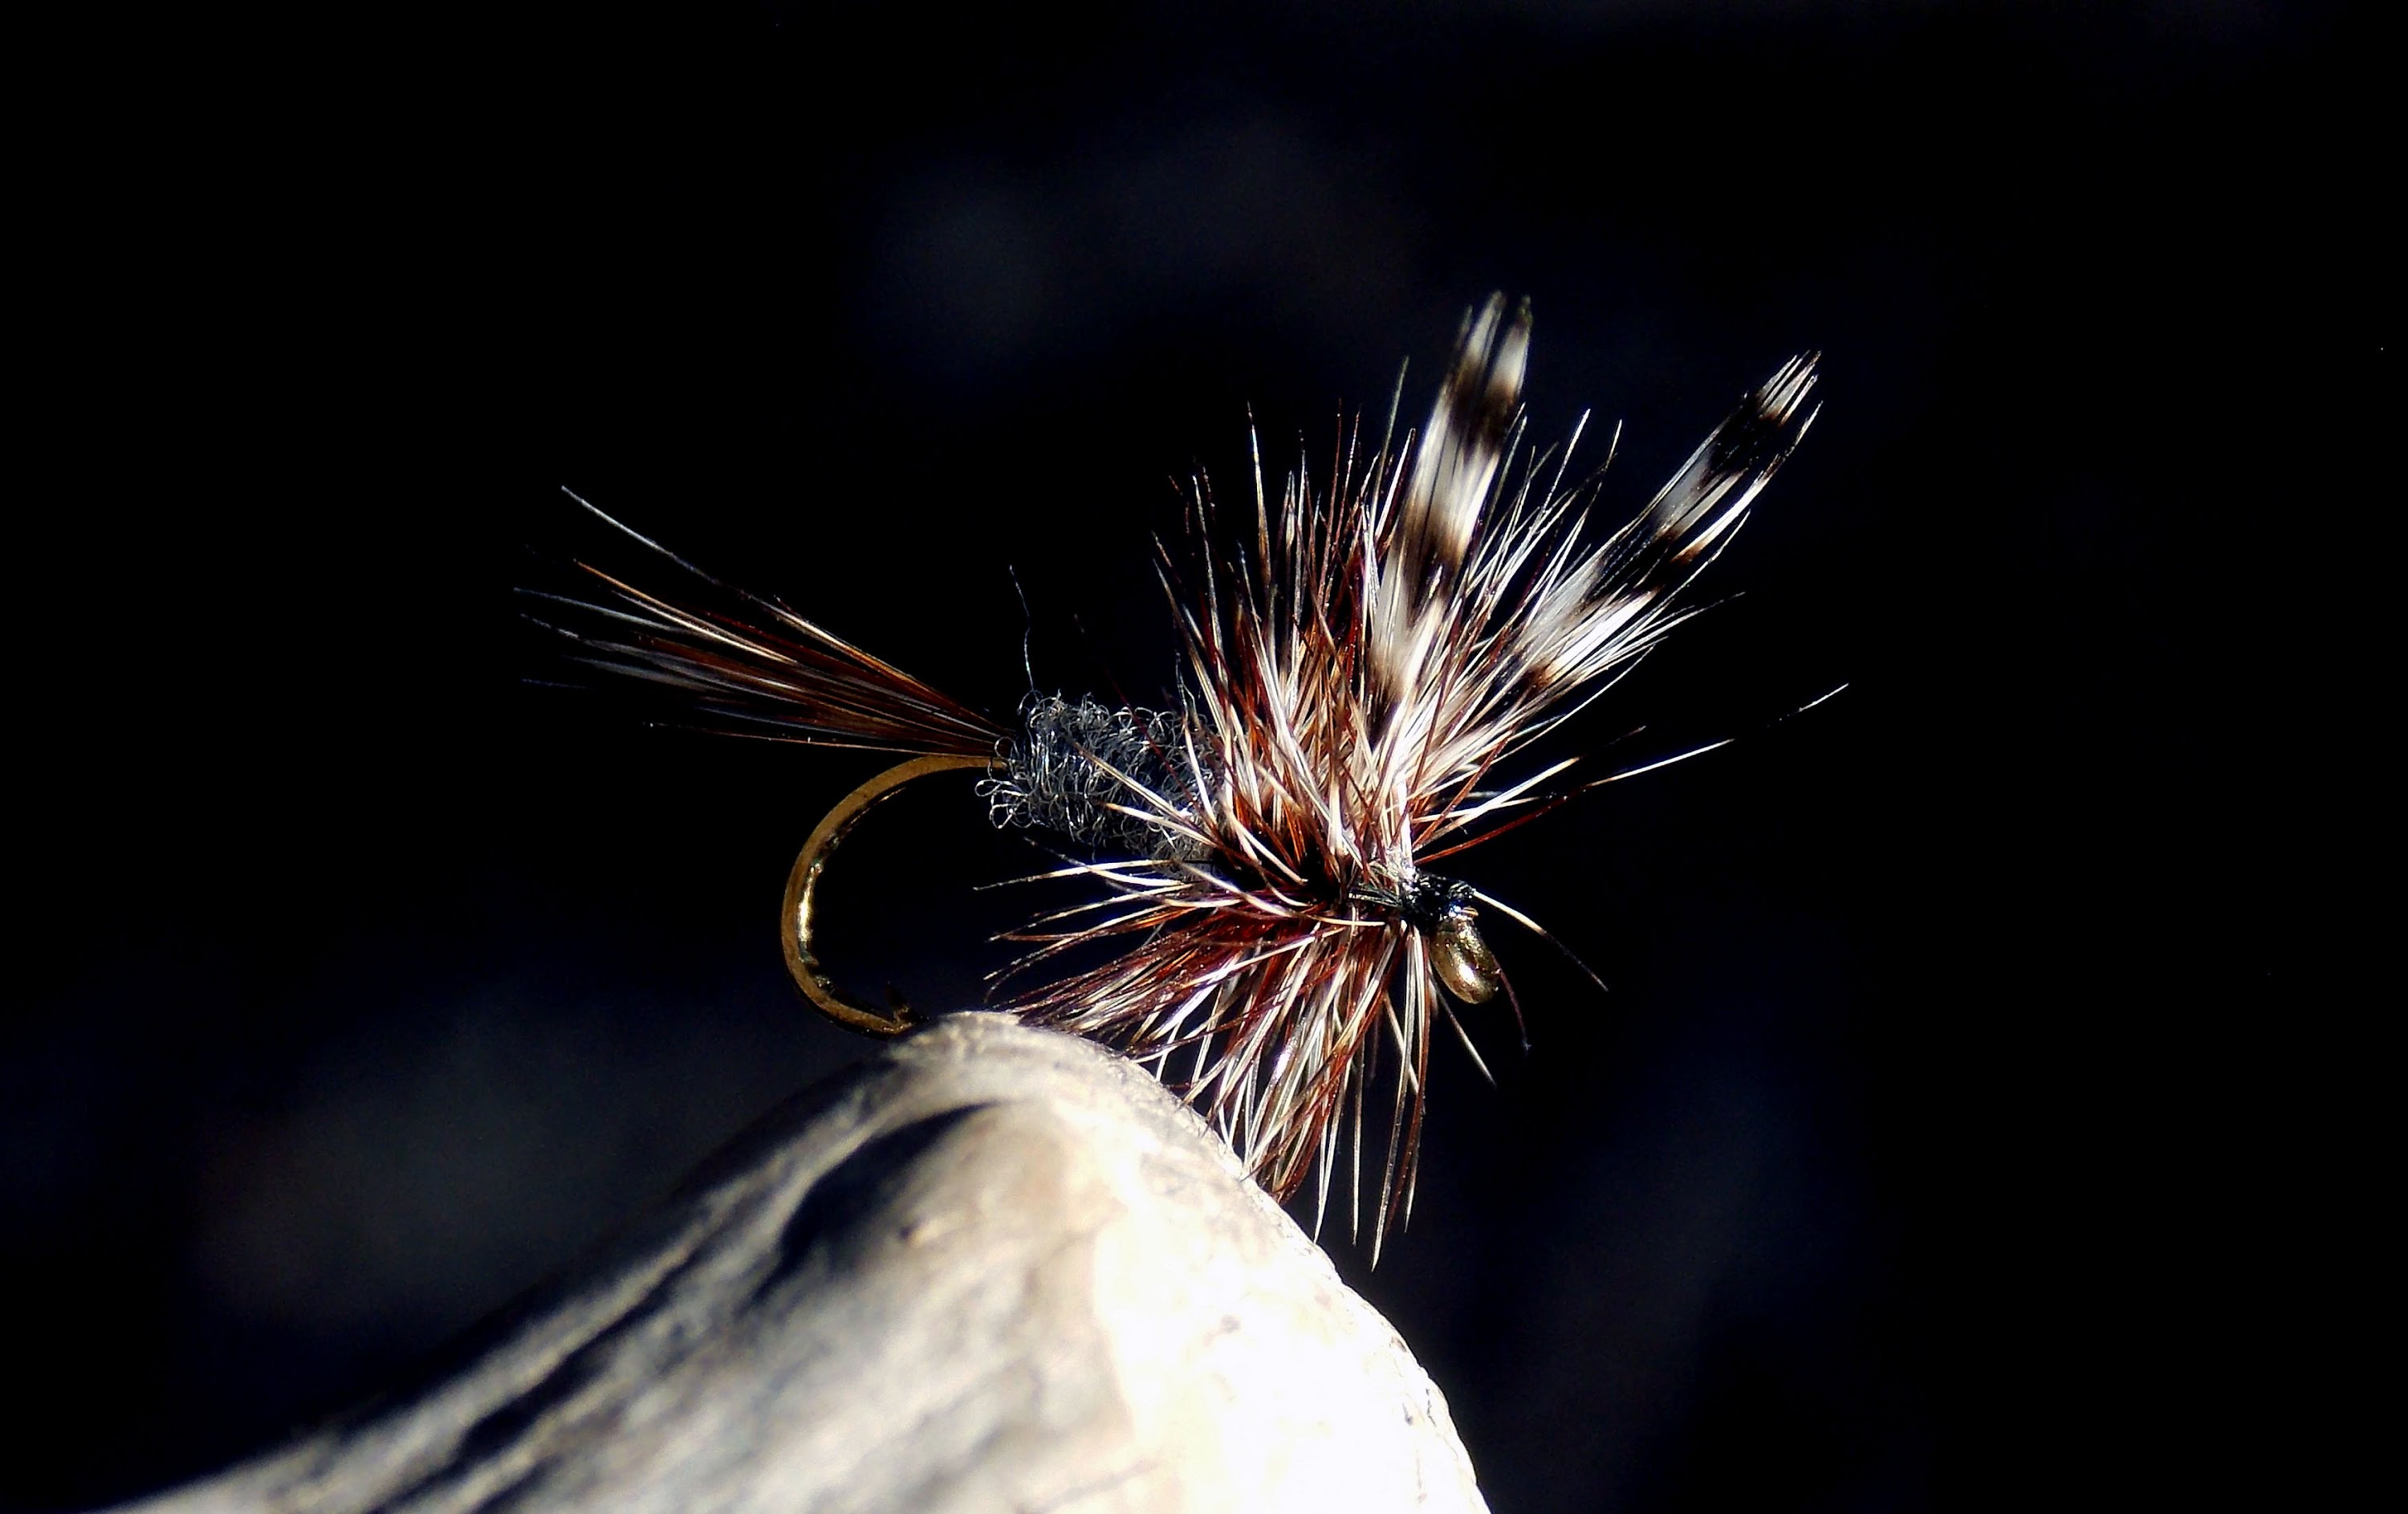 Adams dry fly tying instructions - YouTube